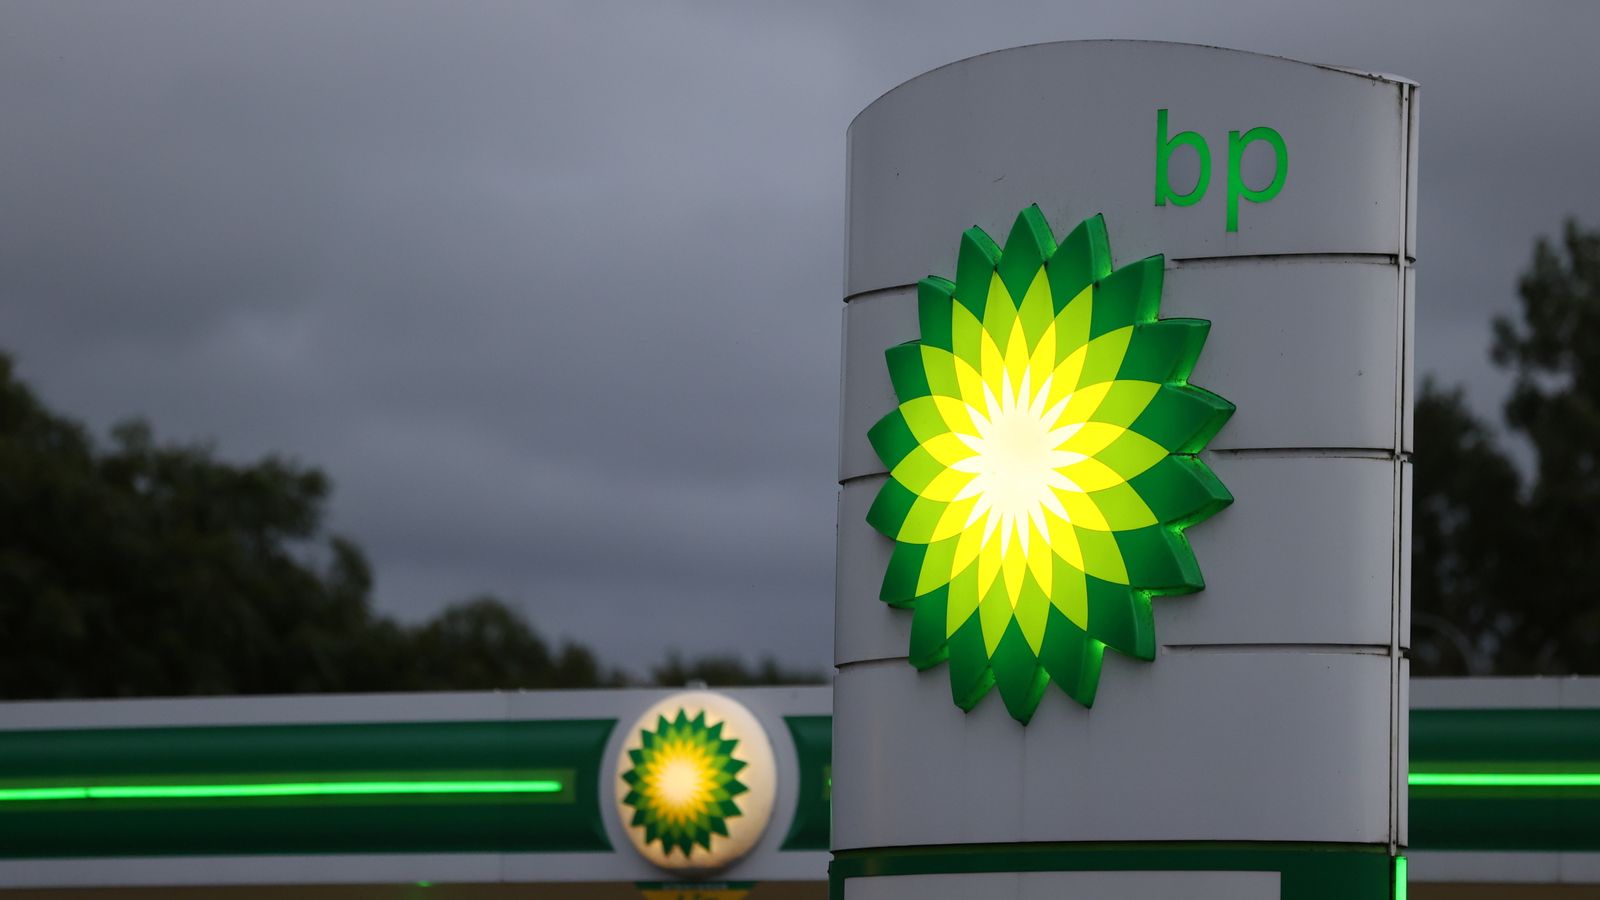 BP quarterly profits come in at £7.1bn after gas prices surge - as calls for 'bigger' windfall tax demands made